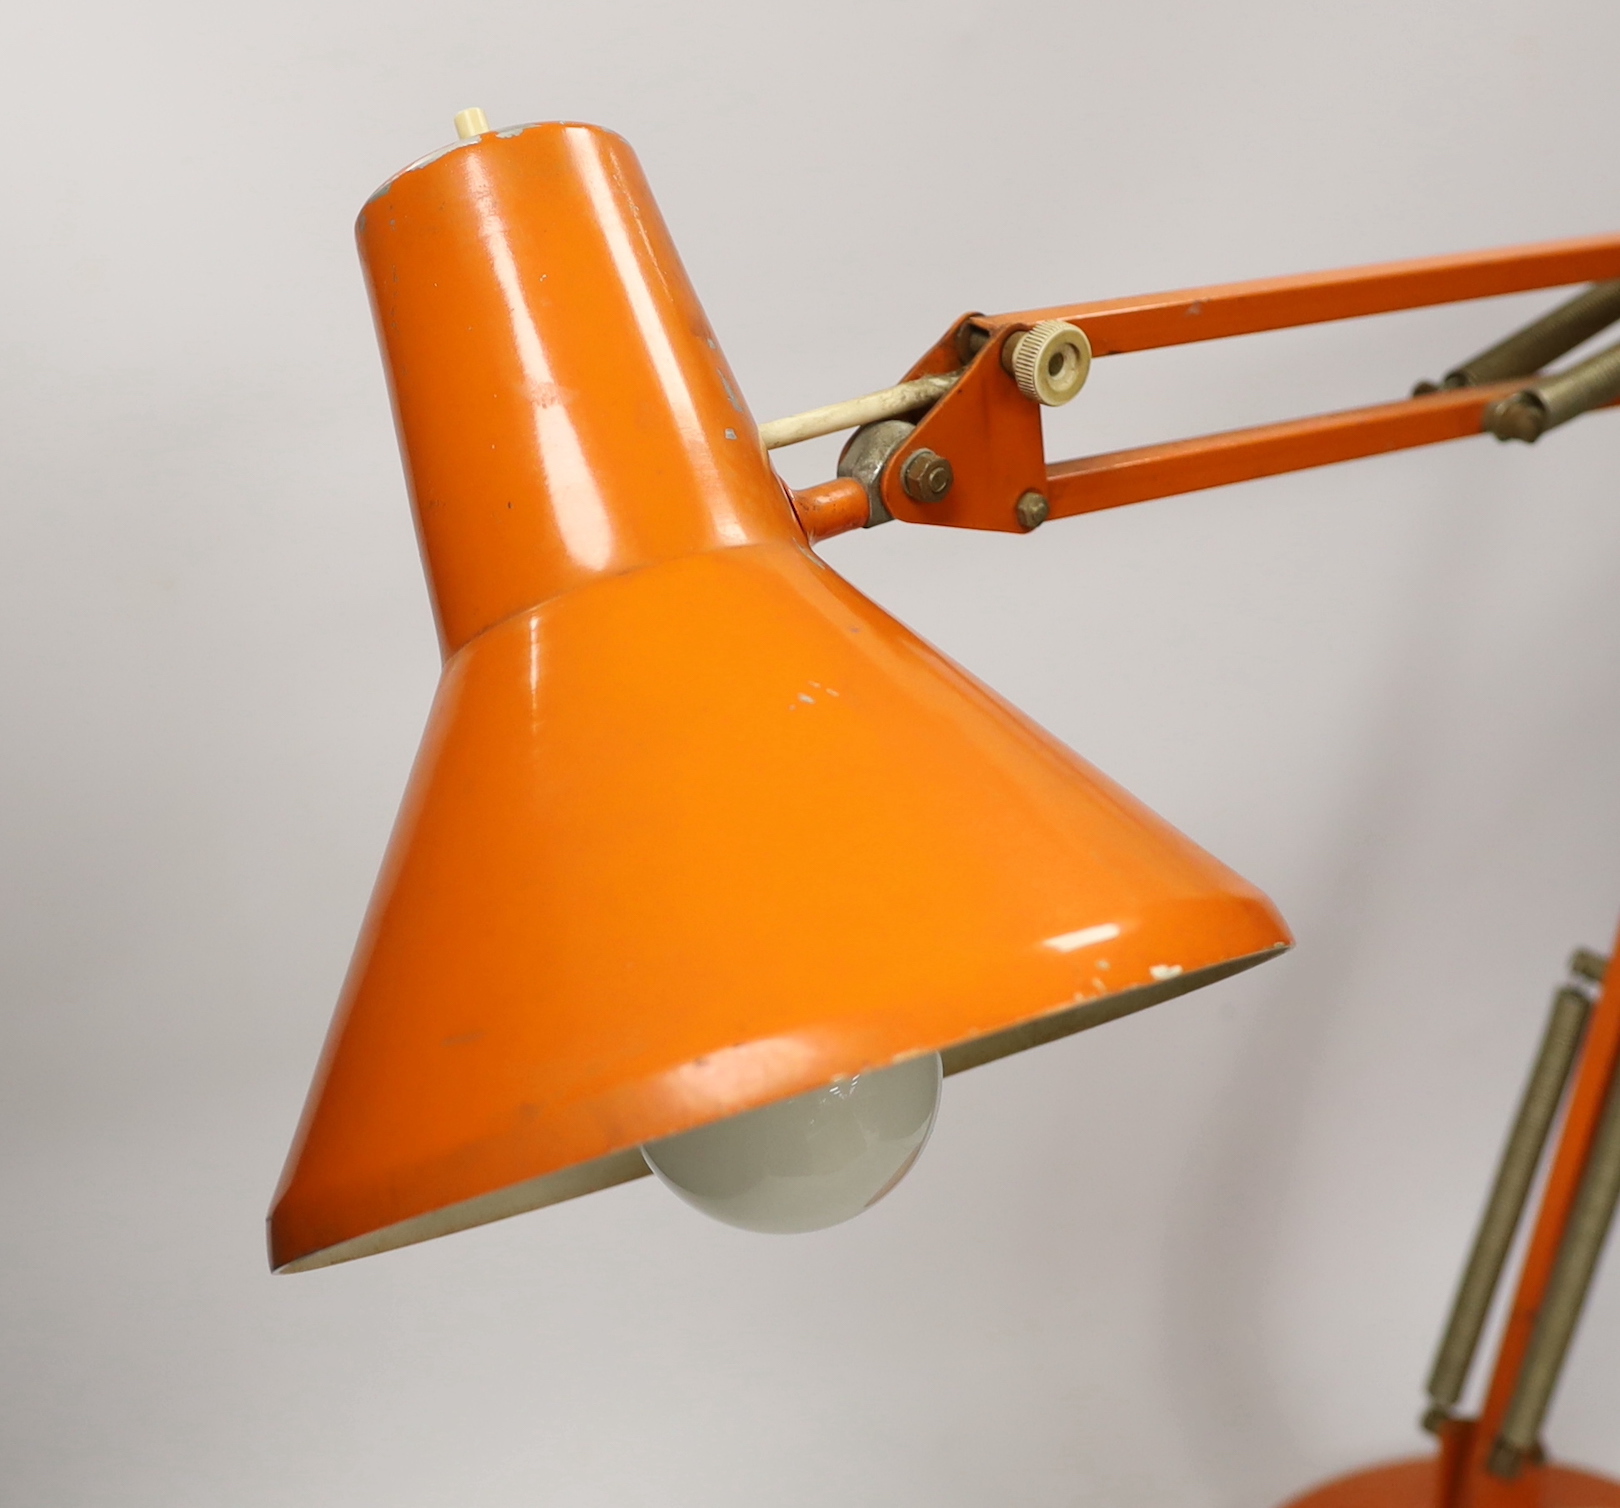 An orange Thousand and One Lamps Ltd angle poise lamp, approximately 76cm high - Image 3 of 4